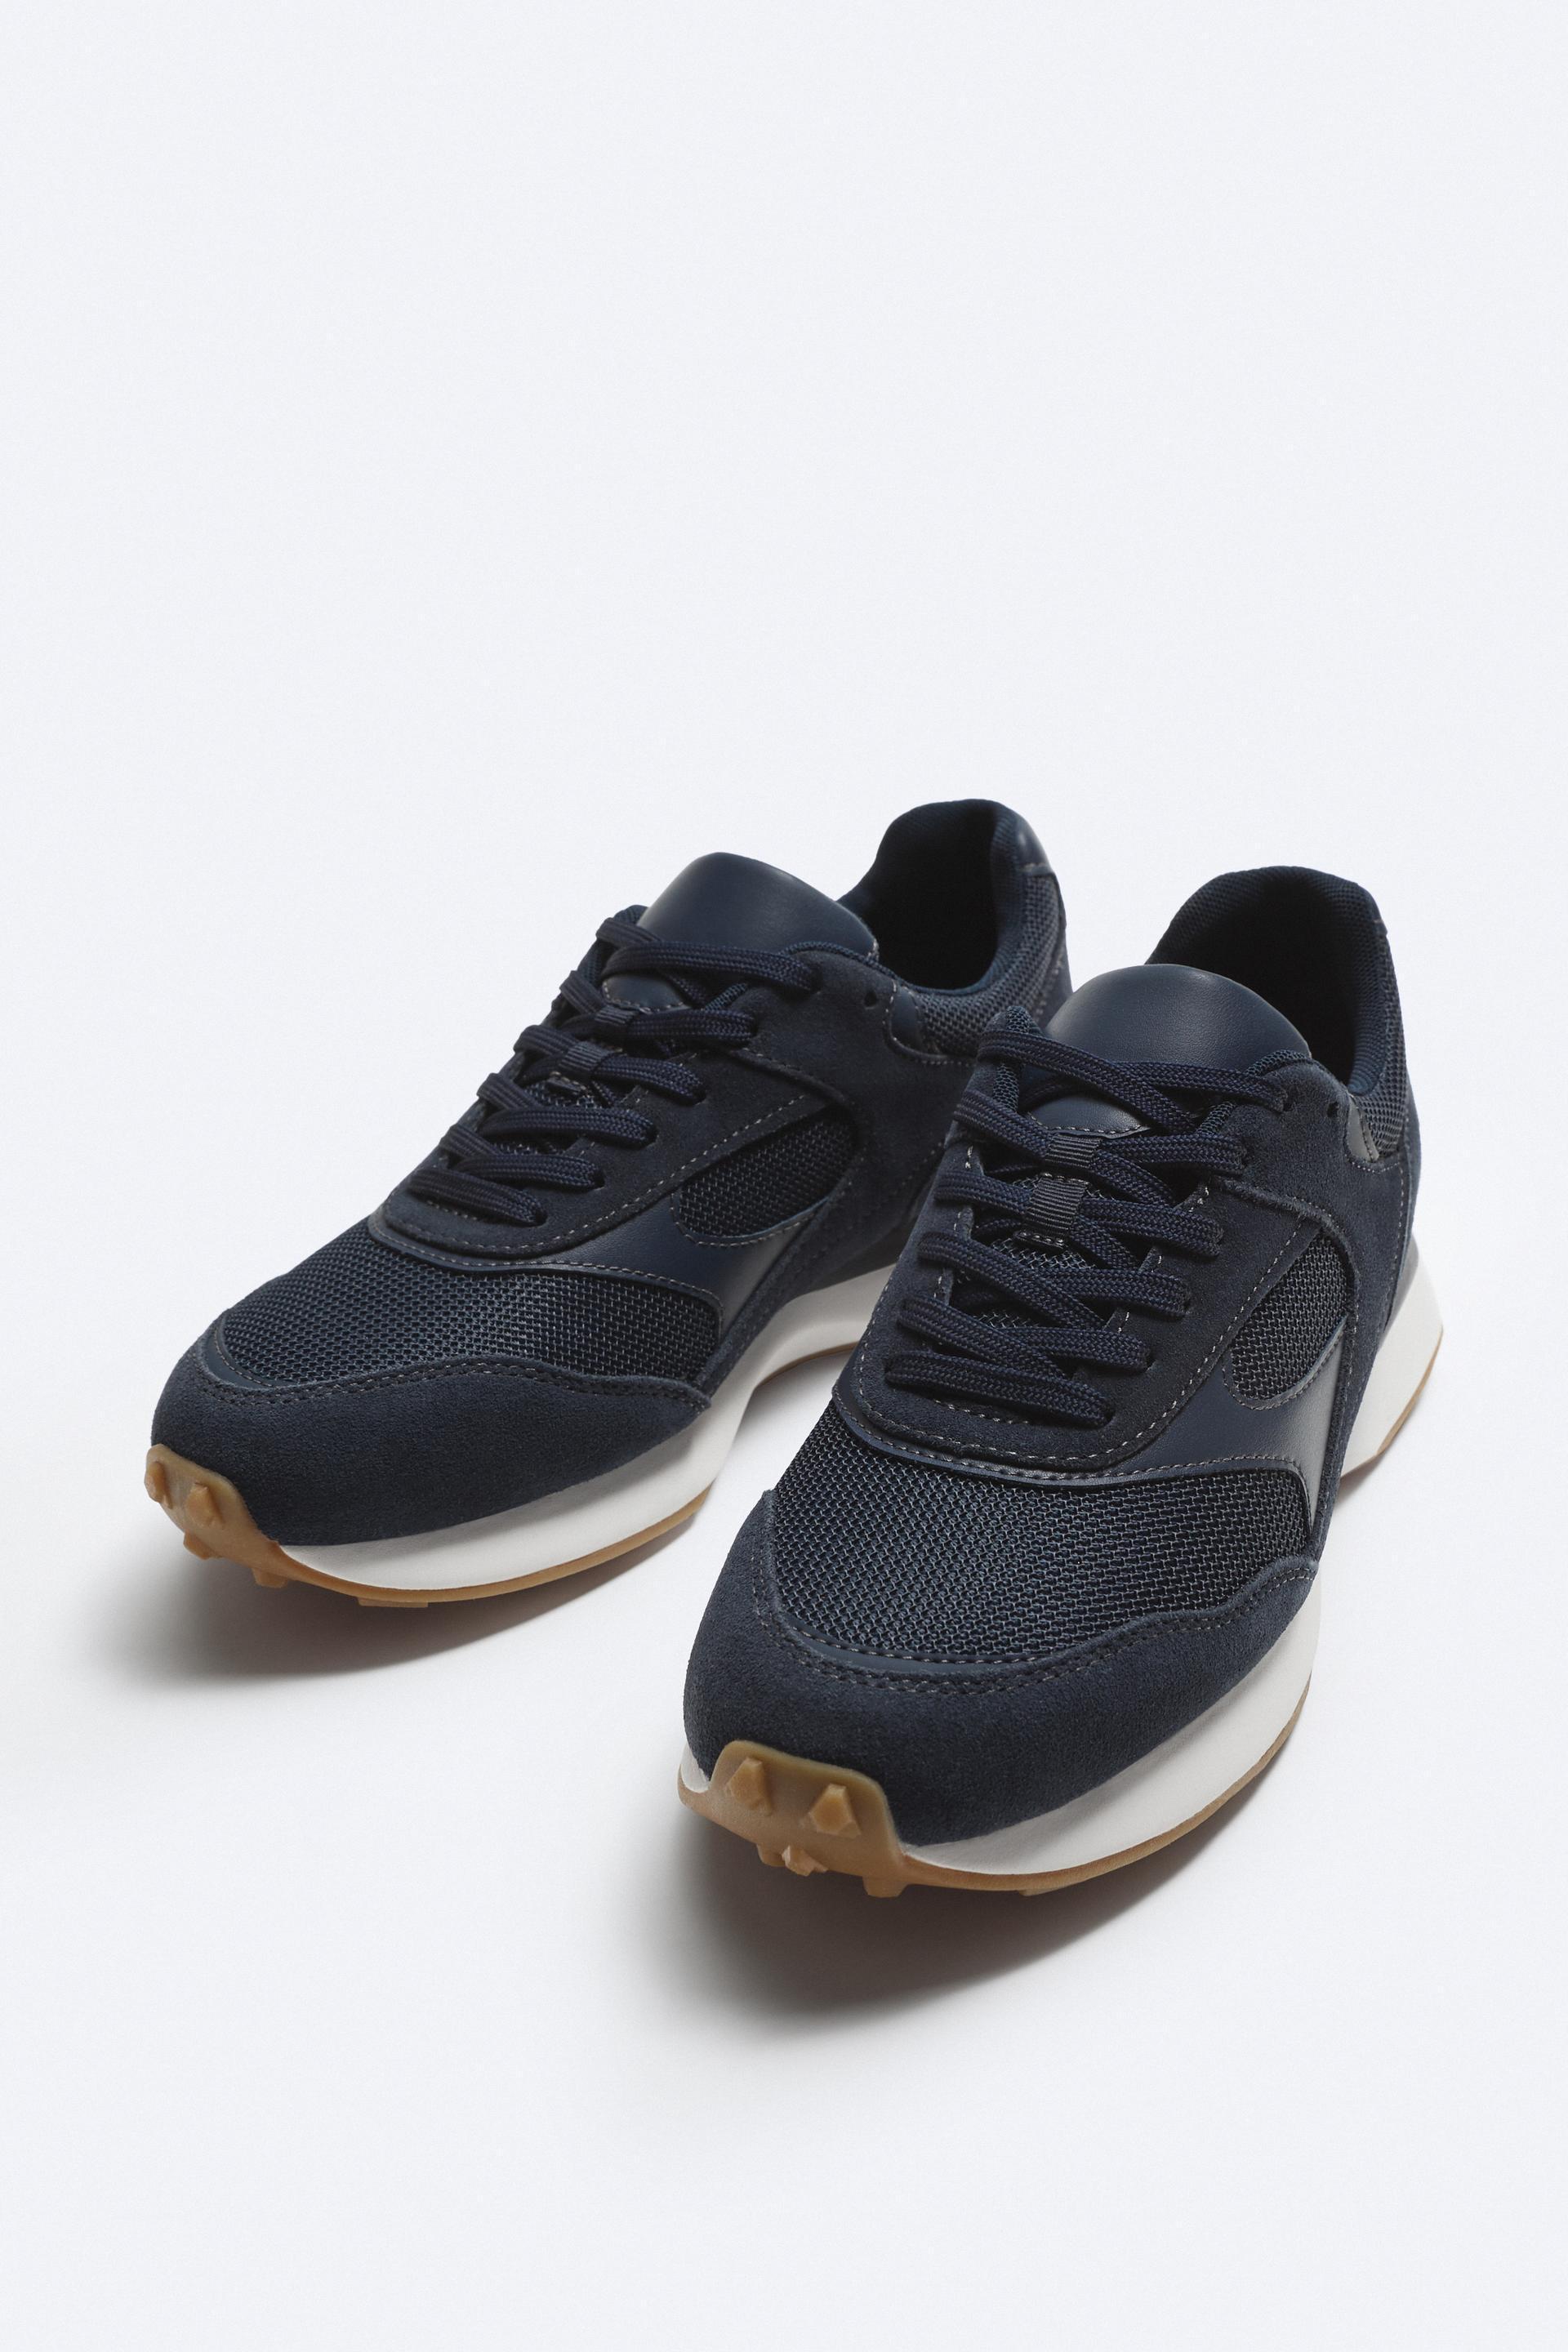 SUEDE RETRO SNEAKERS Product Image